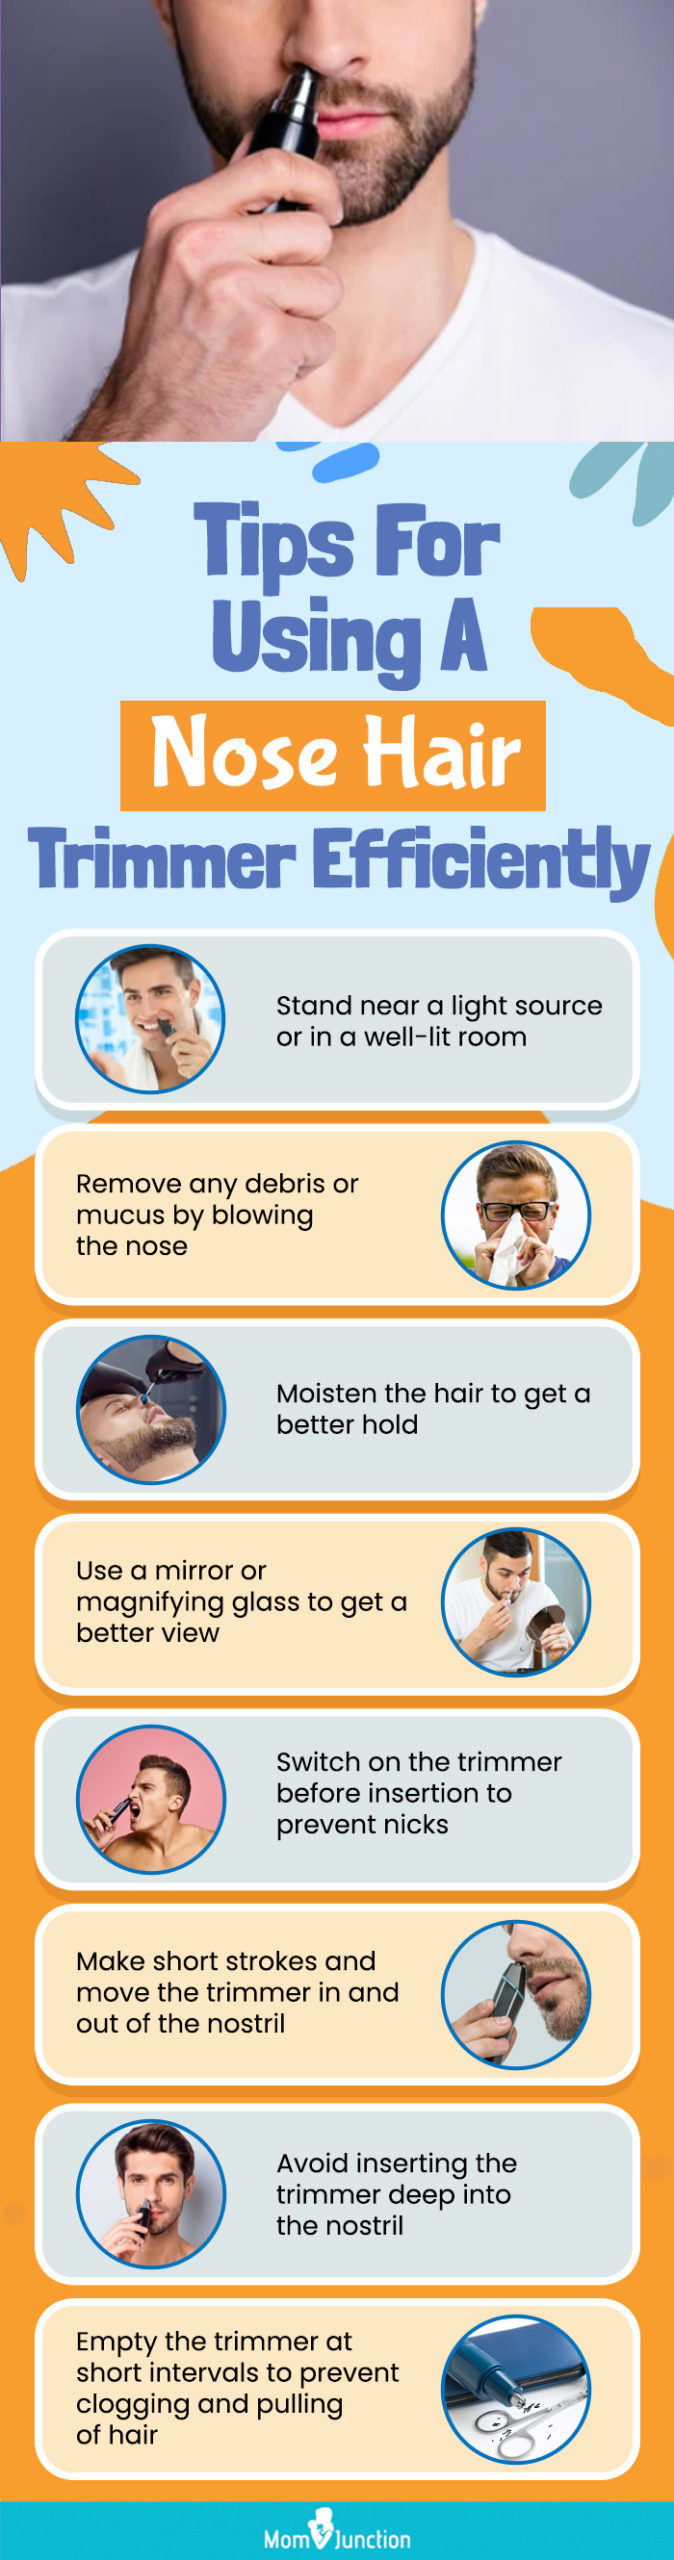 Tips For Using A Nose Hair Trimmer Efficiently (infographic)